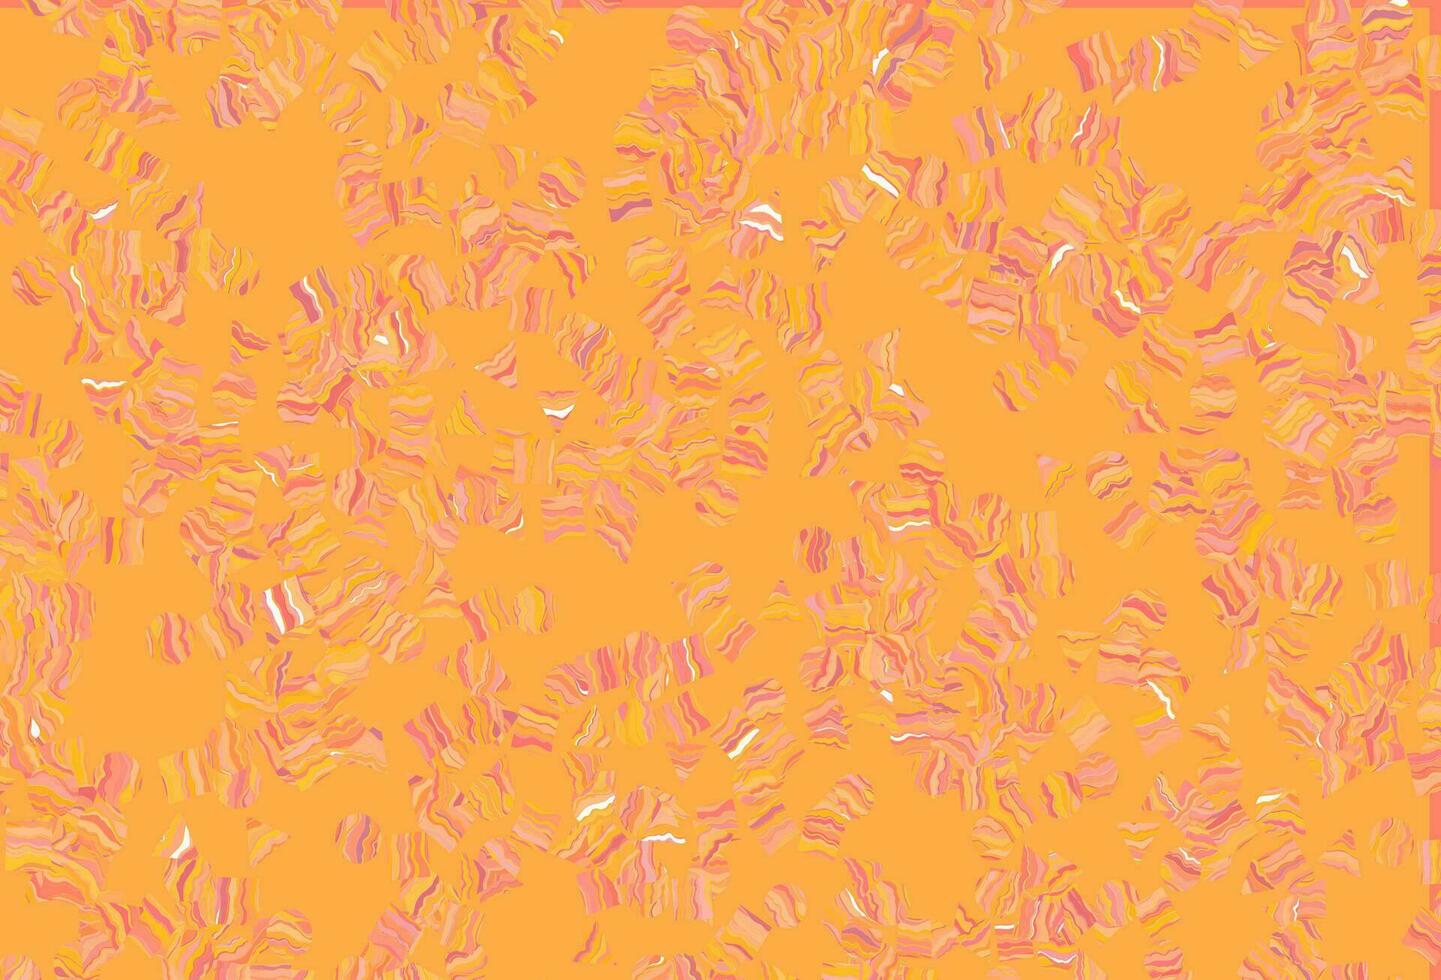 Light Yellow, Orange vector pattern in polygonal style with circles.